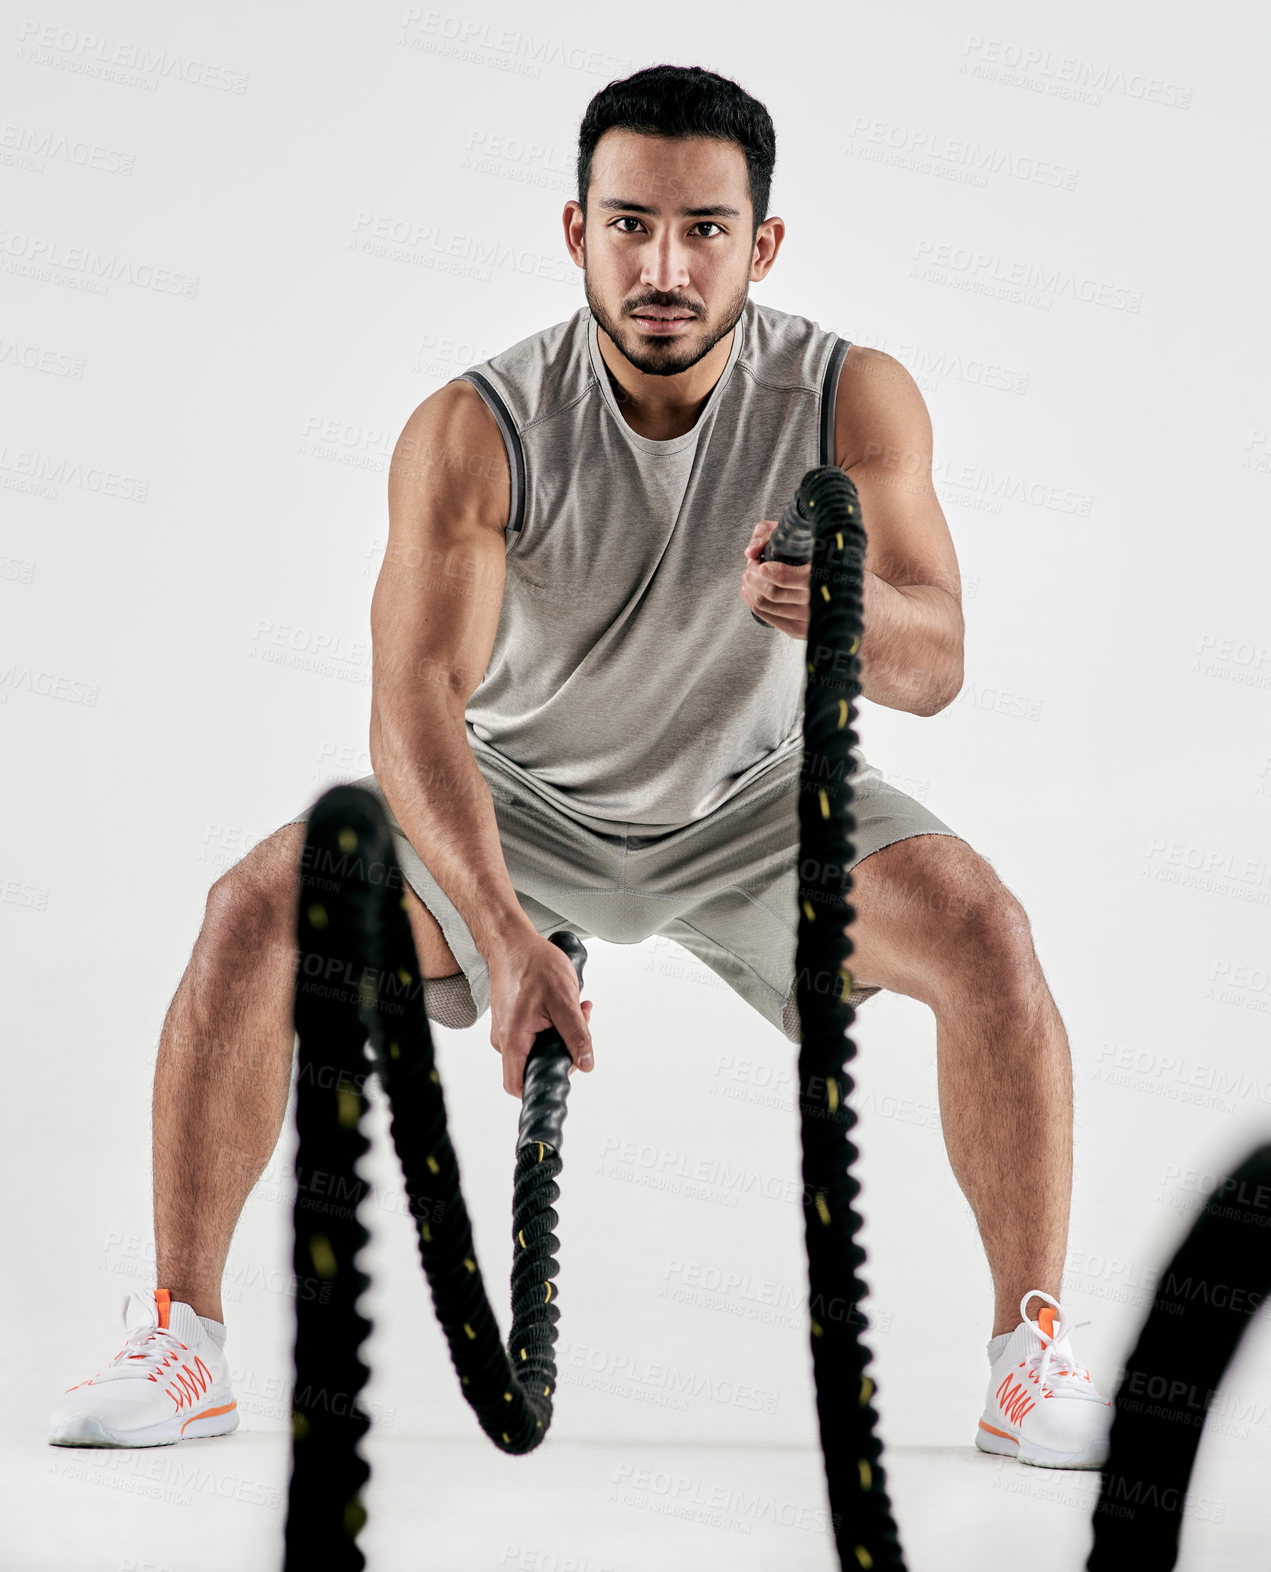 Buy stock photo Studio portrait of a muscular young man exercising with battle ropes against a white background